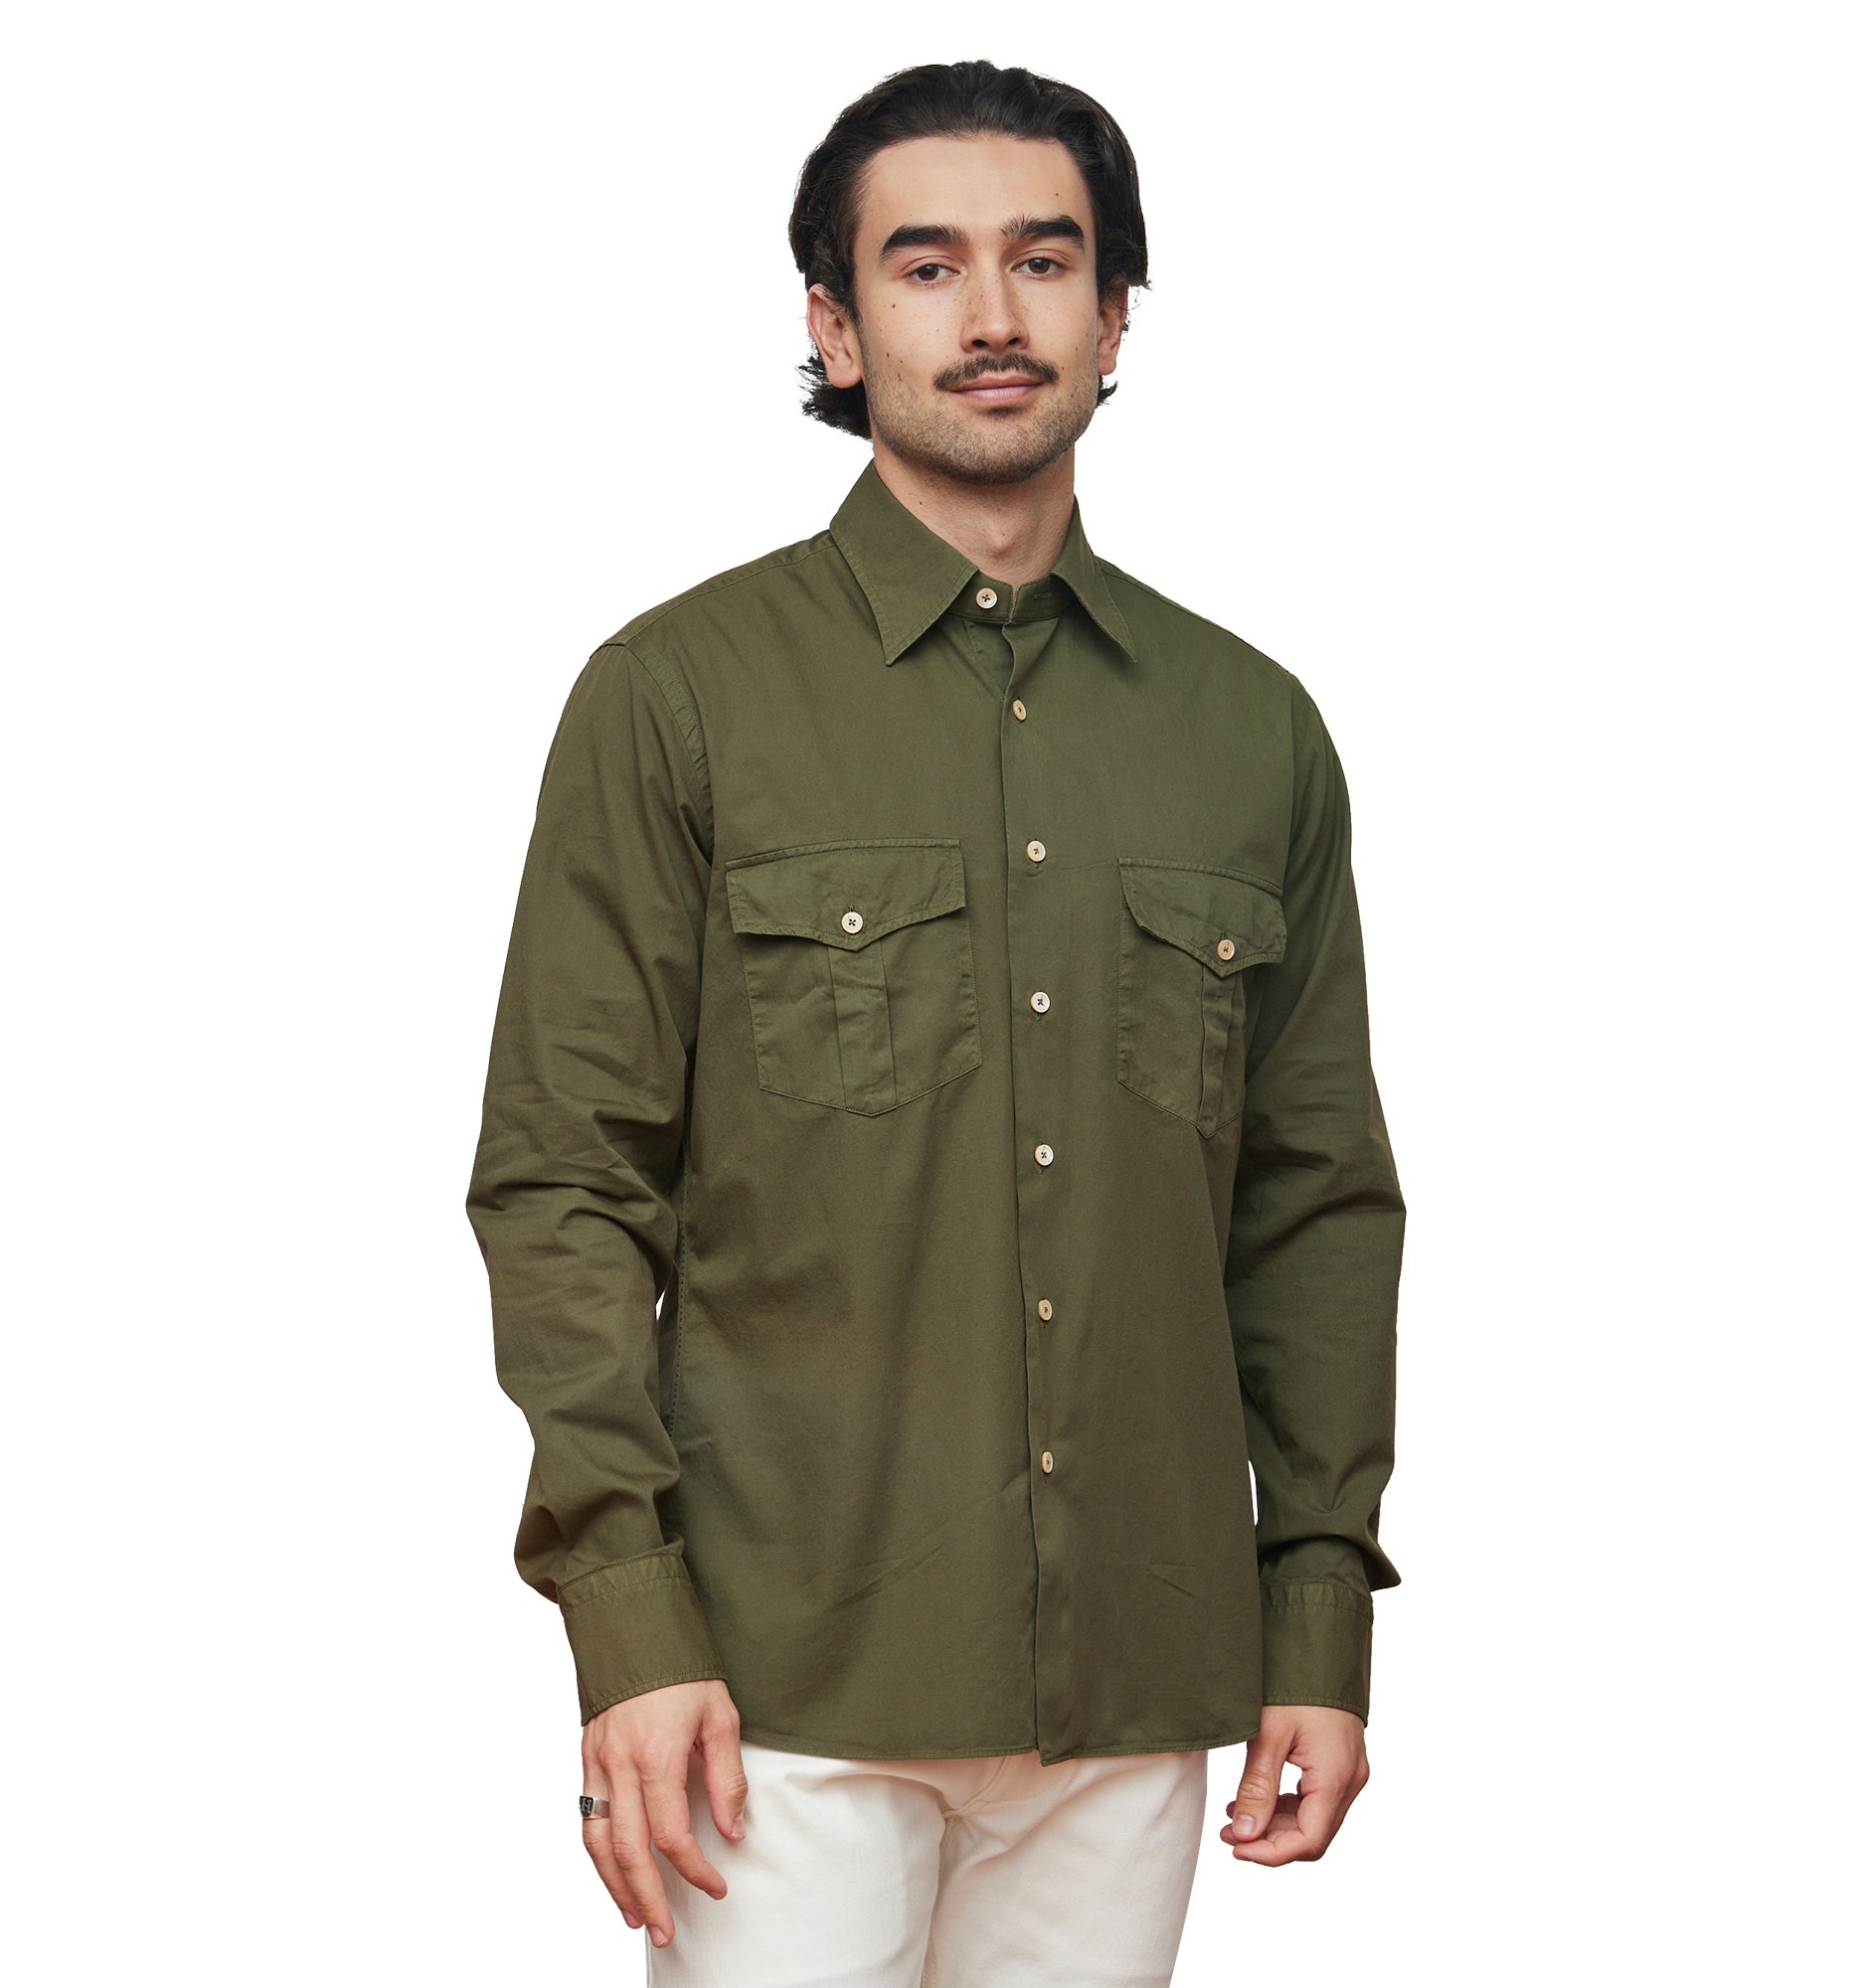 Forest Green Military Shirt